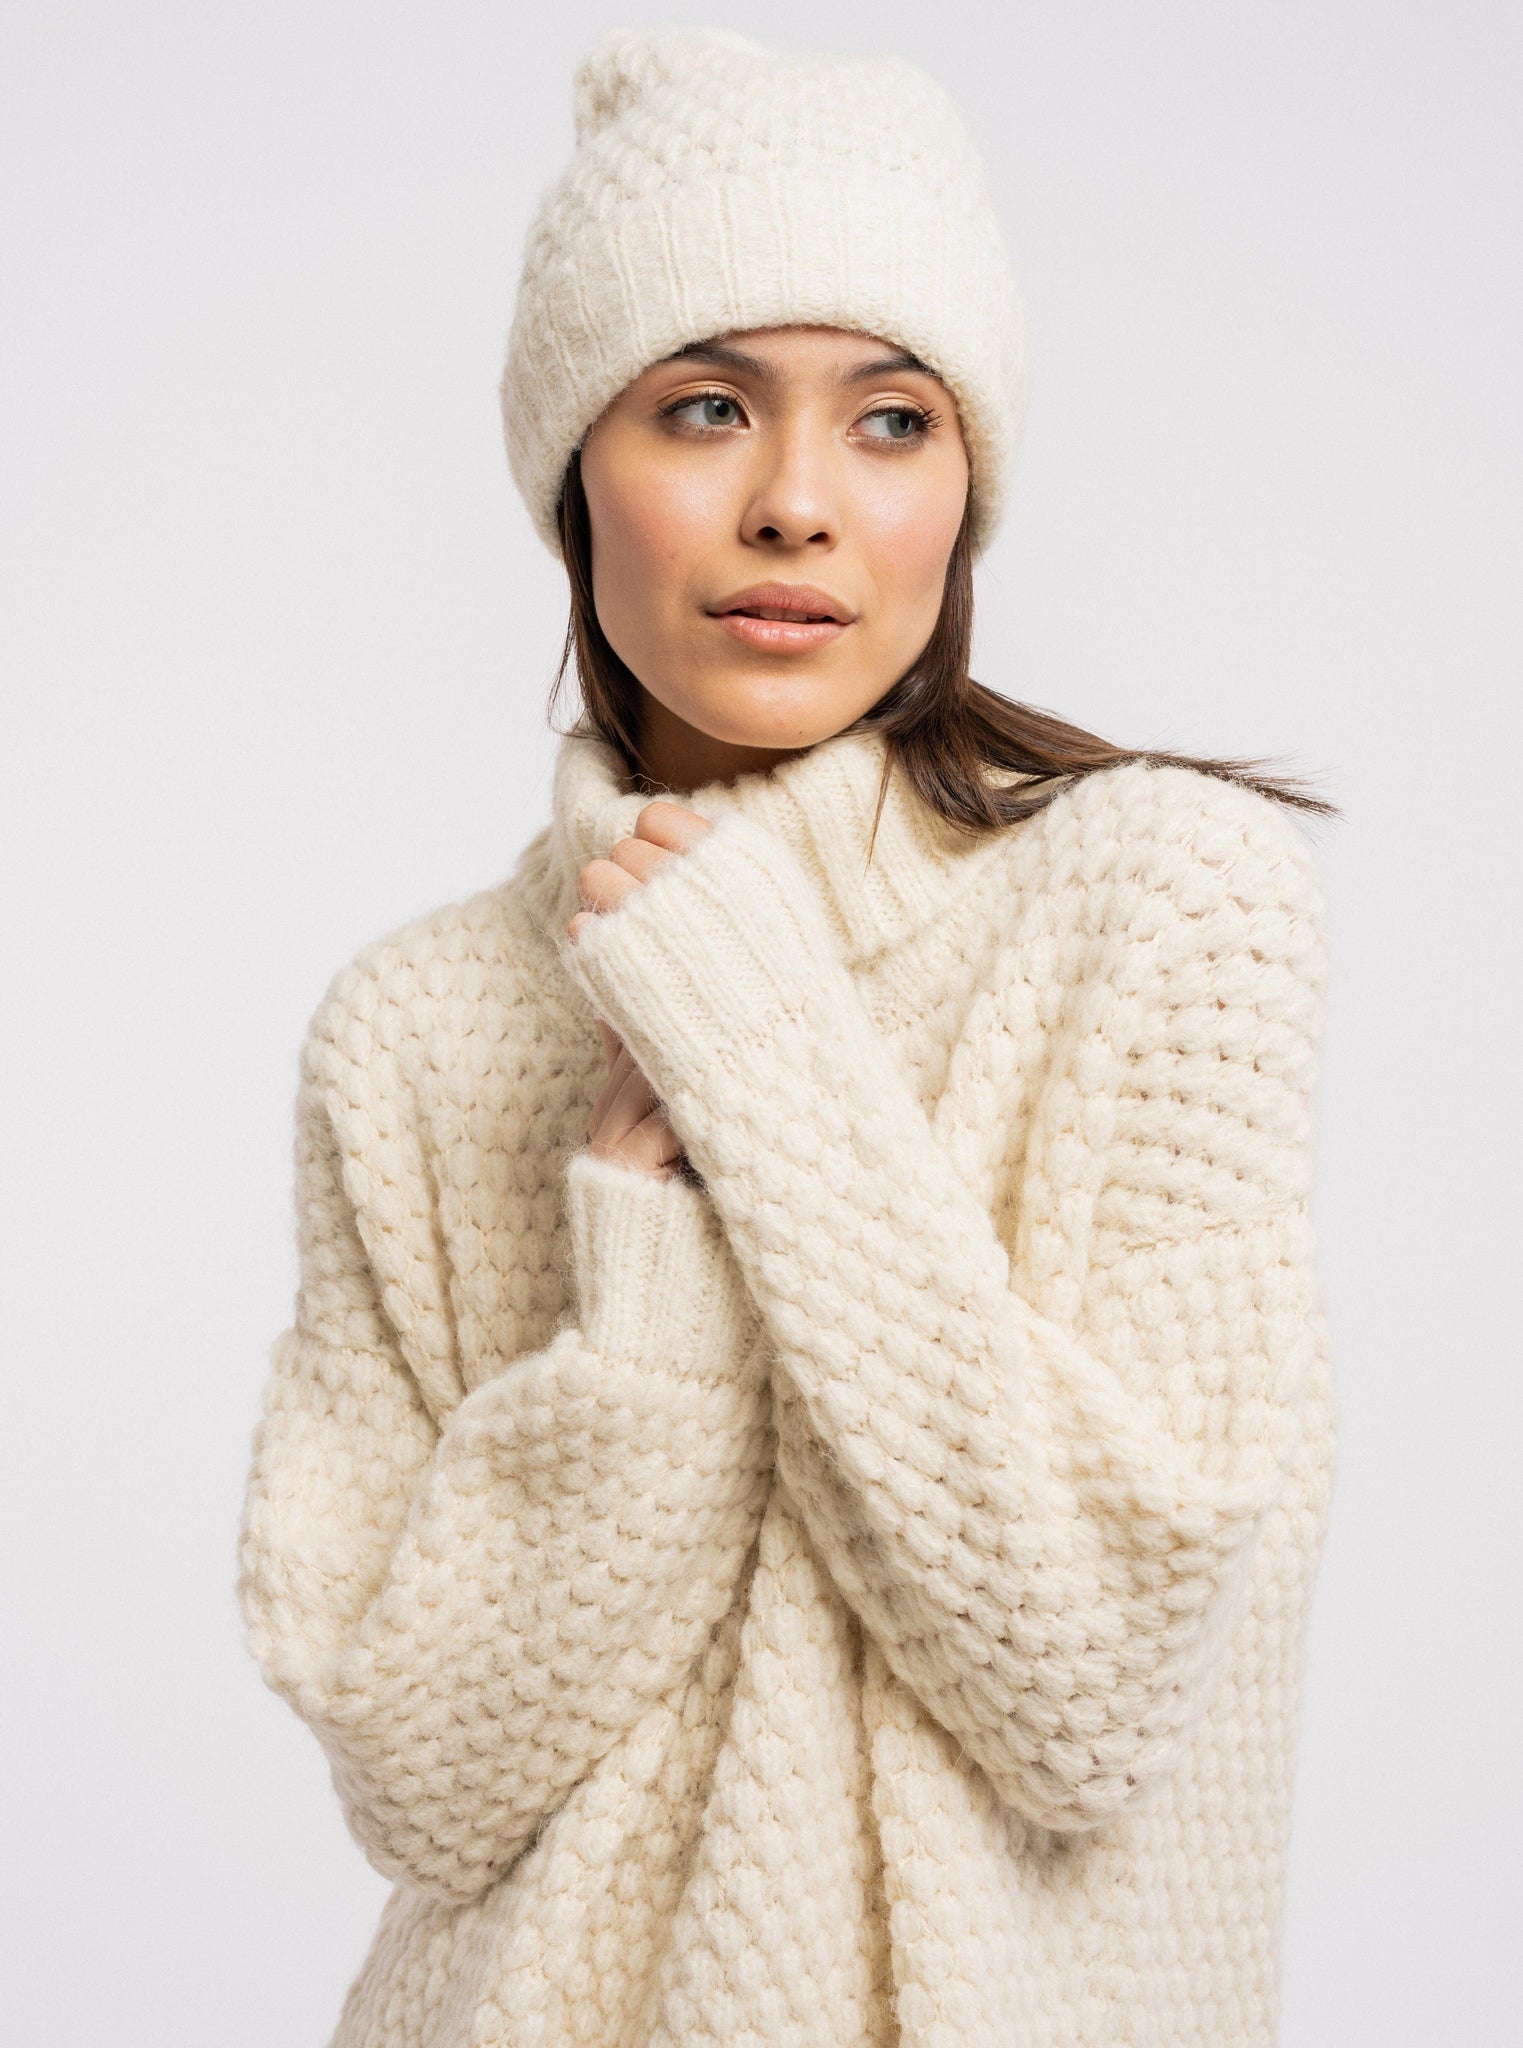 The model is wearing a Heritage Bauble Beanie - Ivory from Peru.